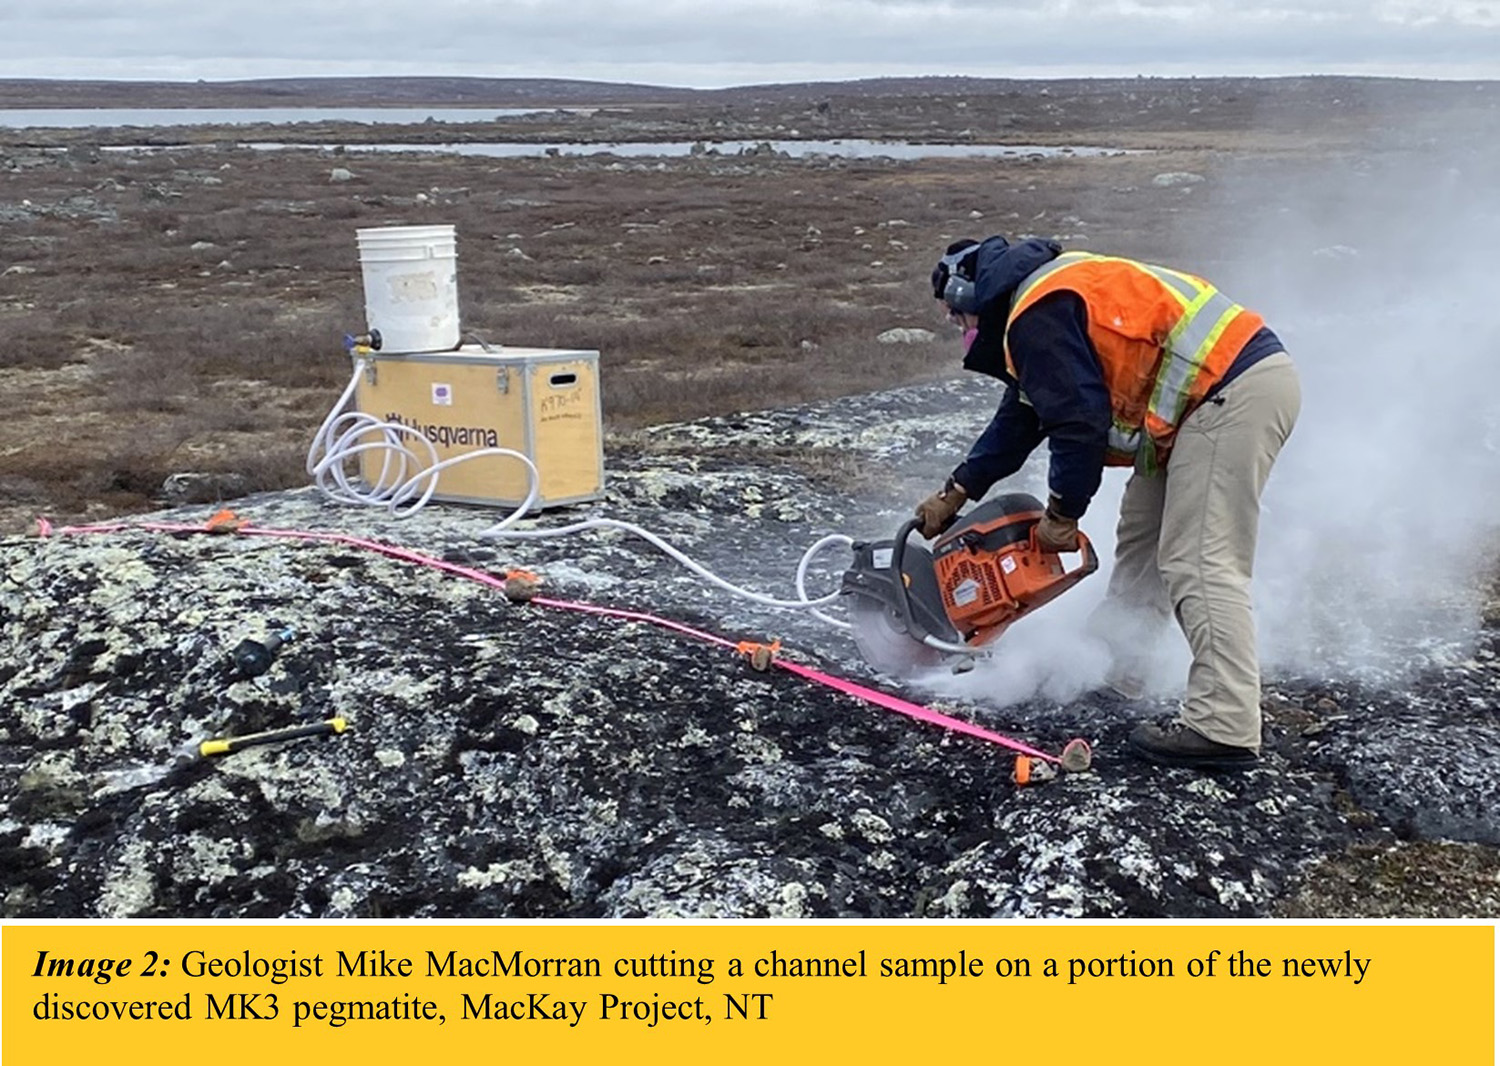 Geologist Mike MacMorran cutting a channel sample on a portion of the newly discovered MK3 pegmatite, MacKay Project, NT